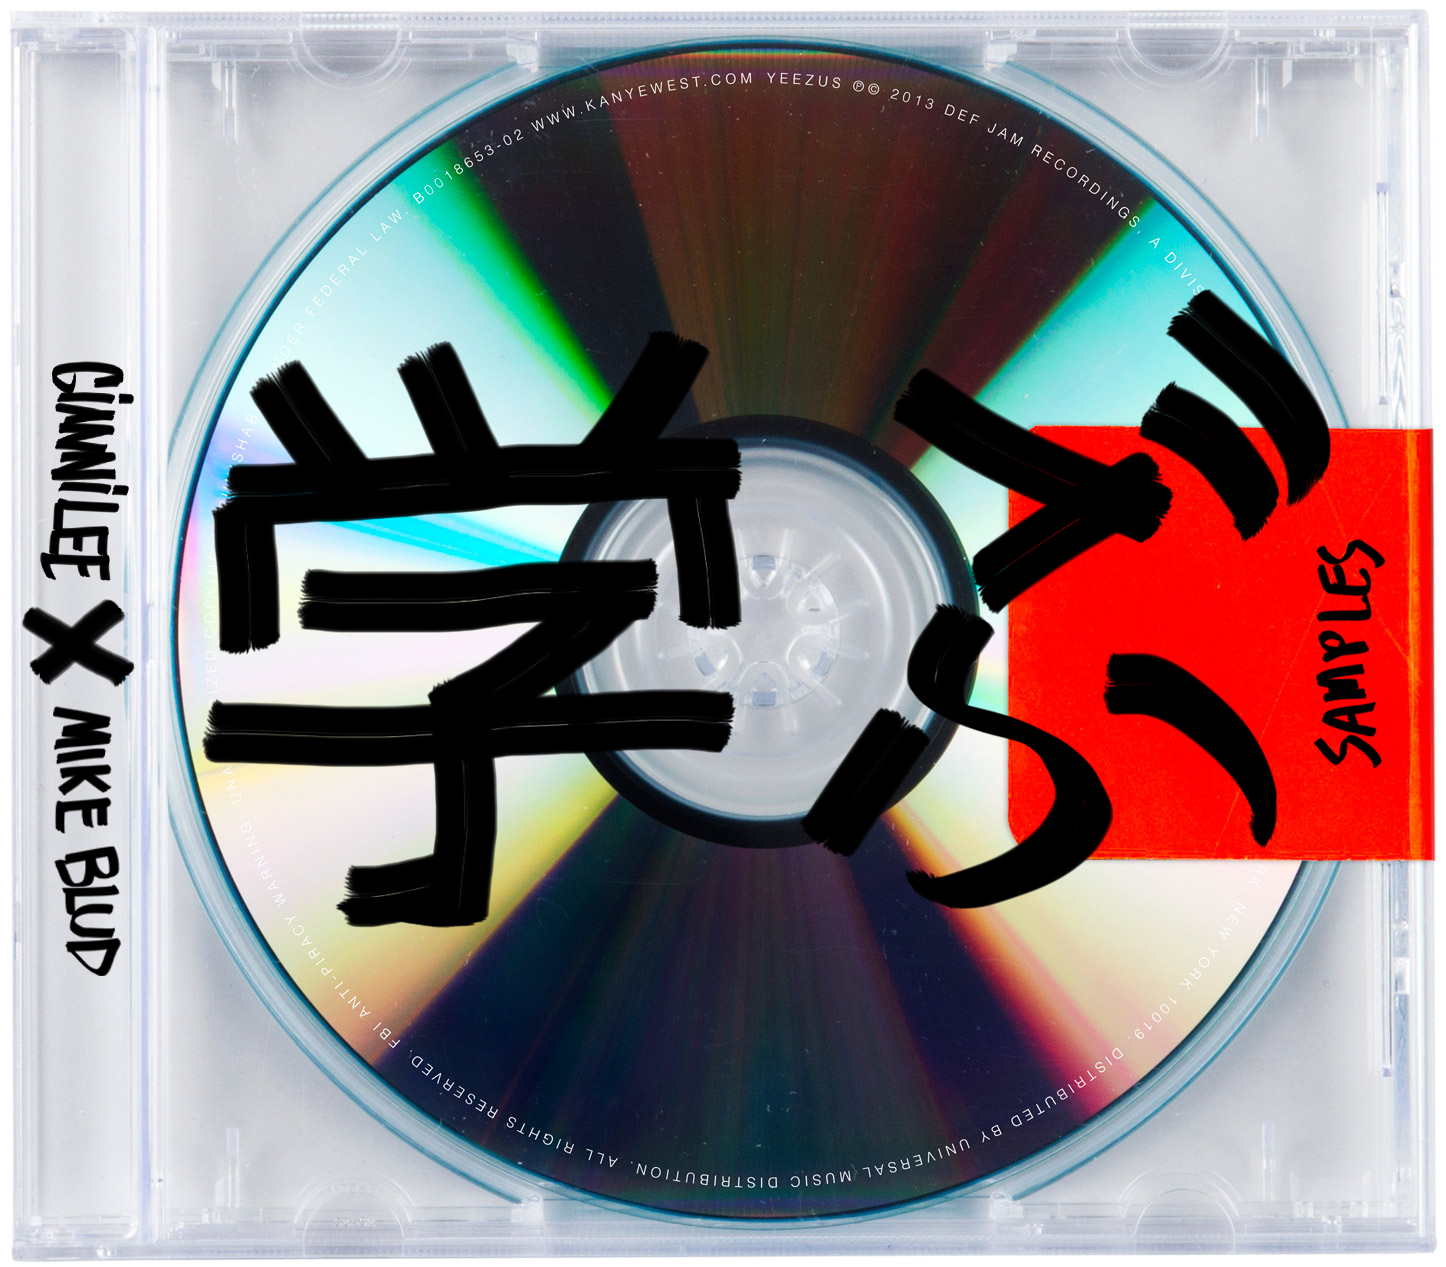 gianni-lee-x-mike-blud-presents-kanye-west-yeezus-the-samples-mixtape-HHS1987-2013 Gianni Lee x Mike Blud presents Kanye West - Yeezus (The Samples) (Mixtape)  